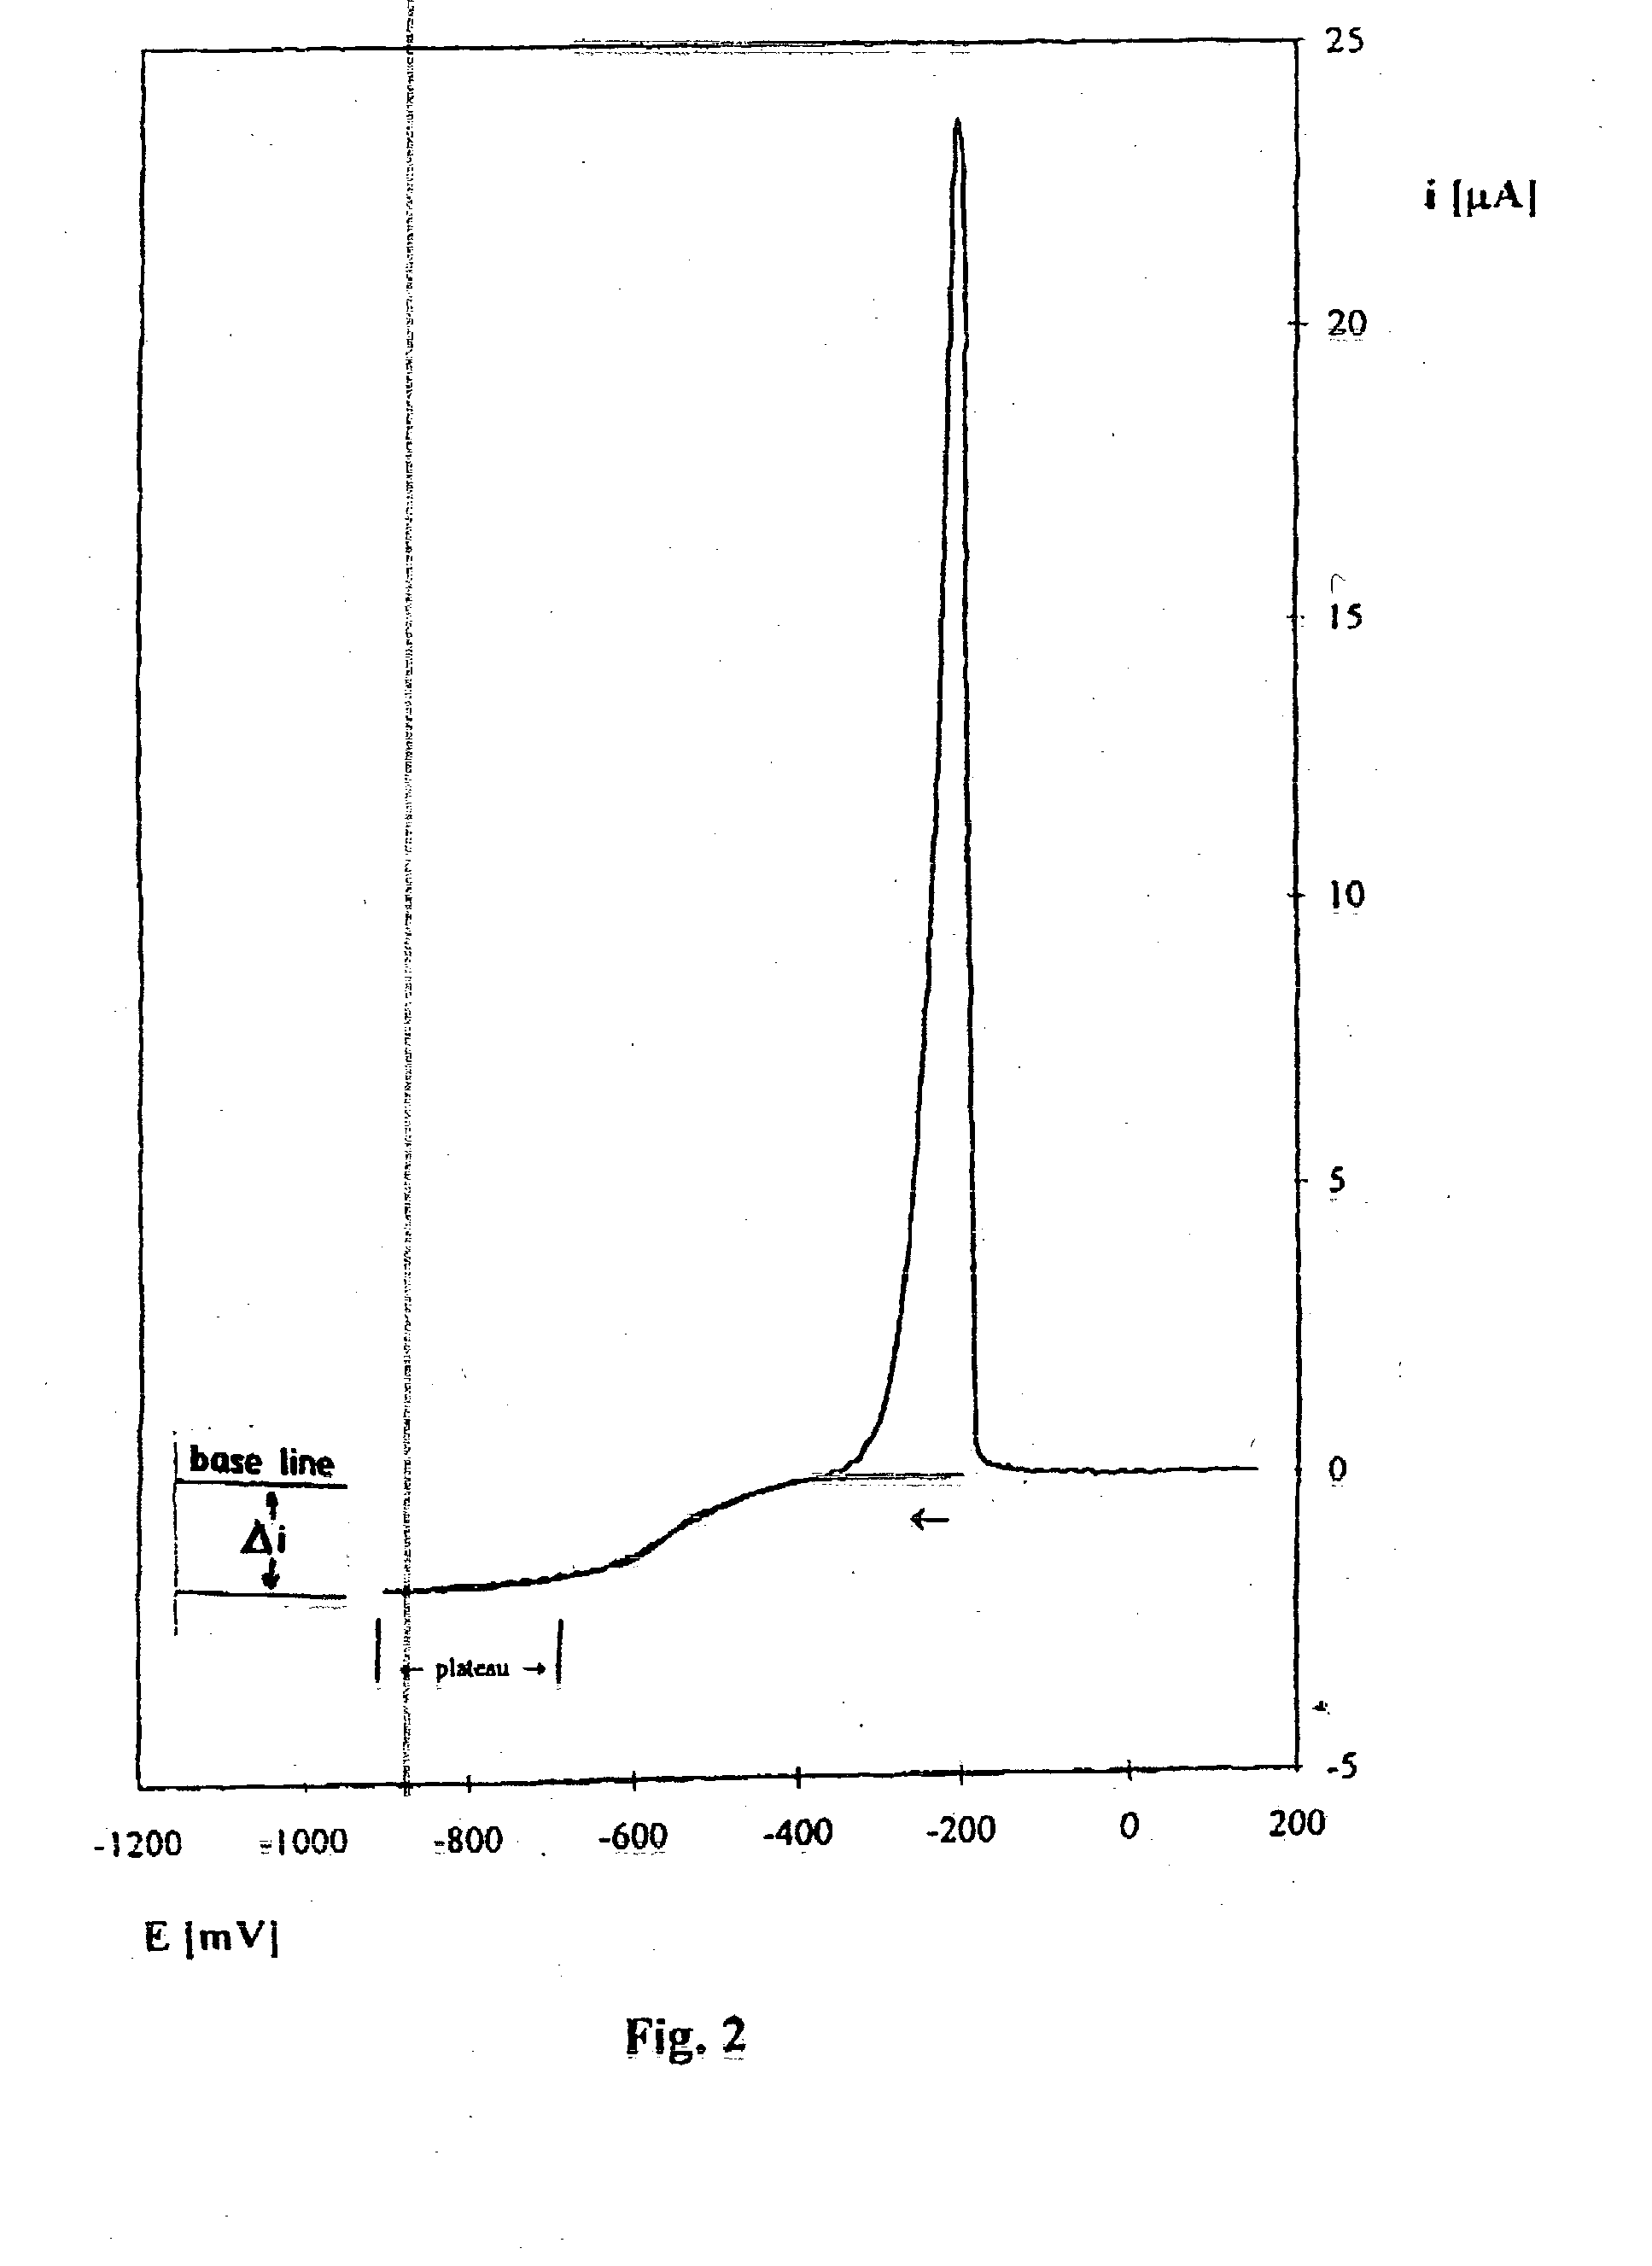 Method of measuring copper ion concentration in industrial electrolytes